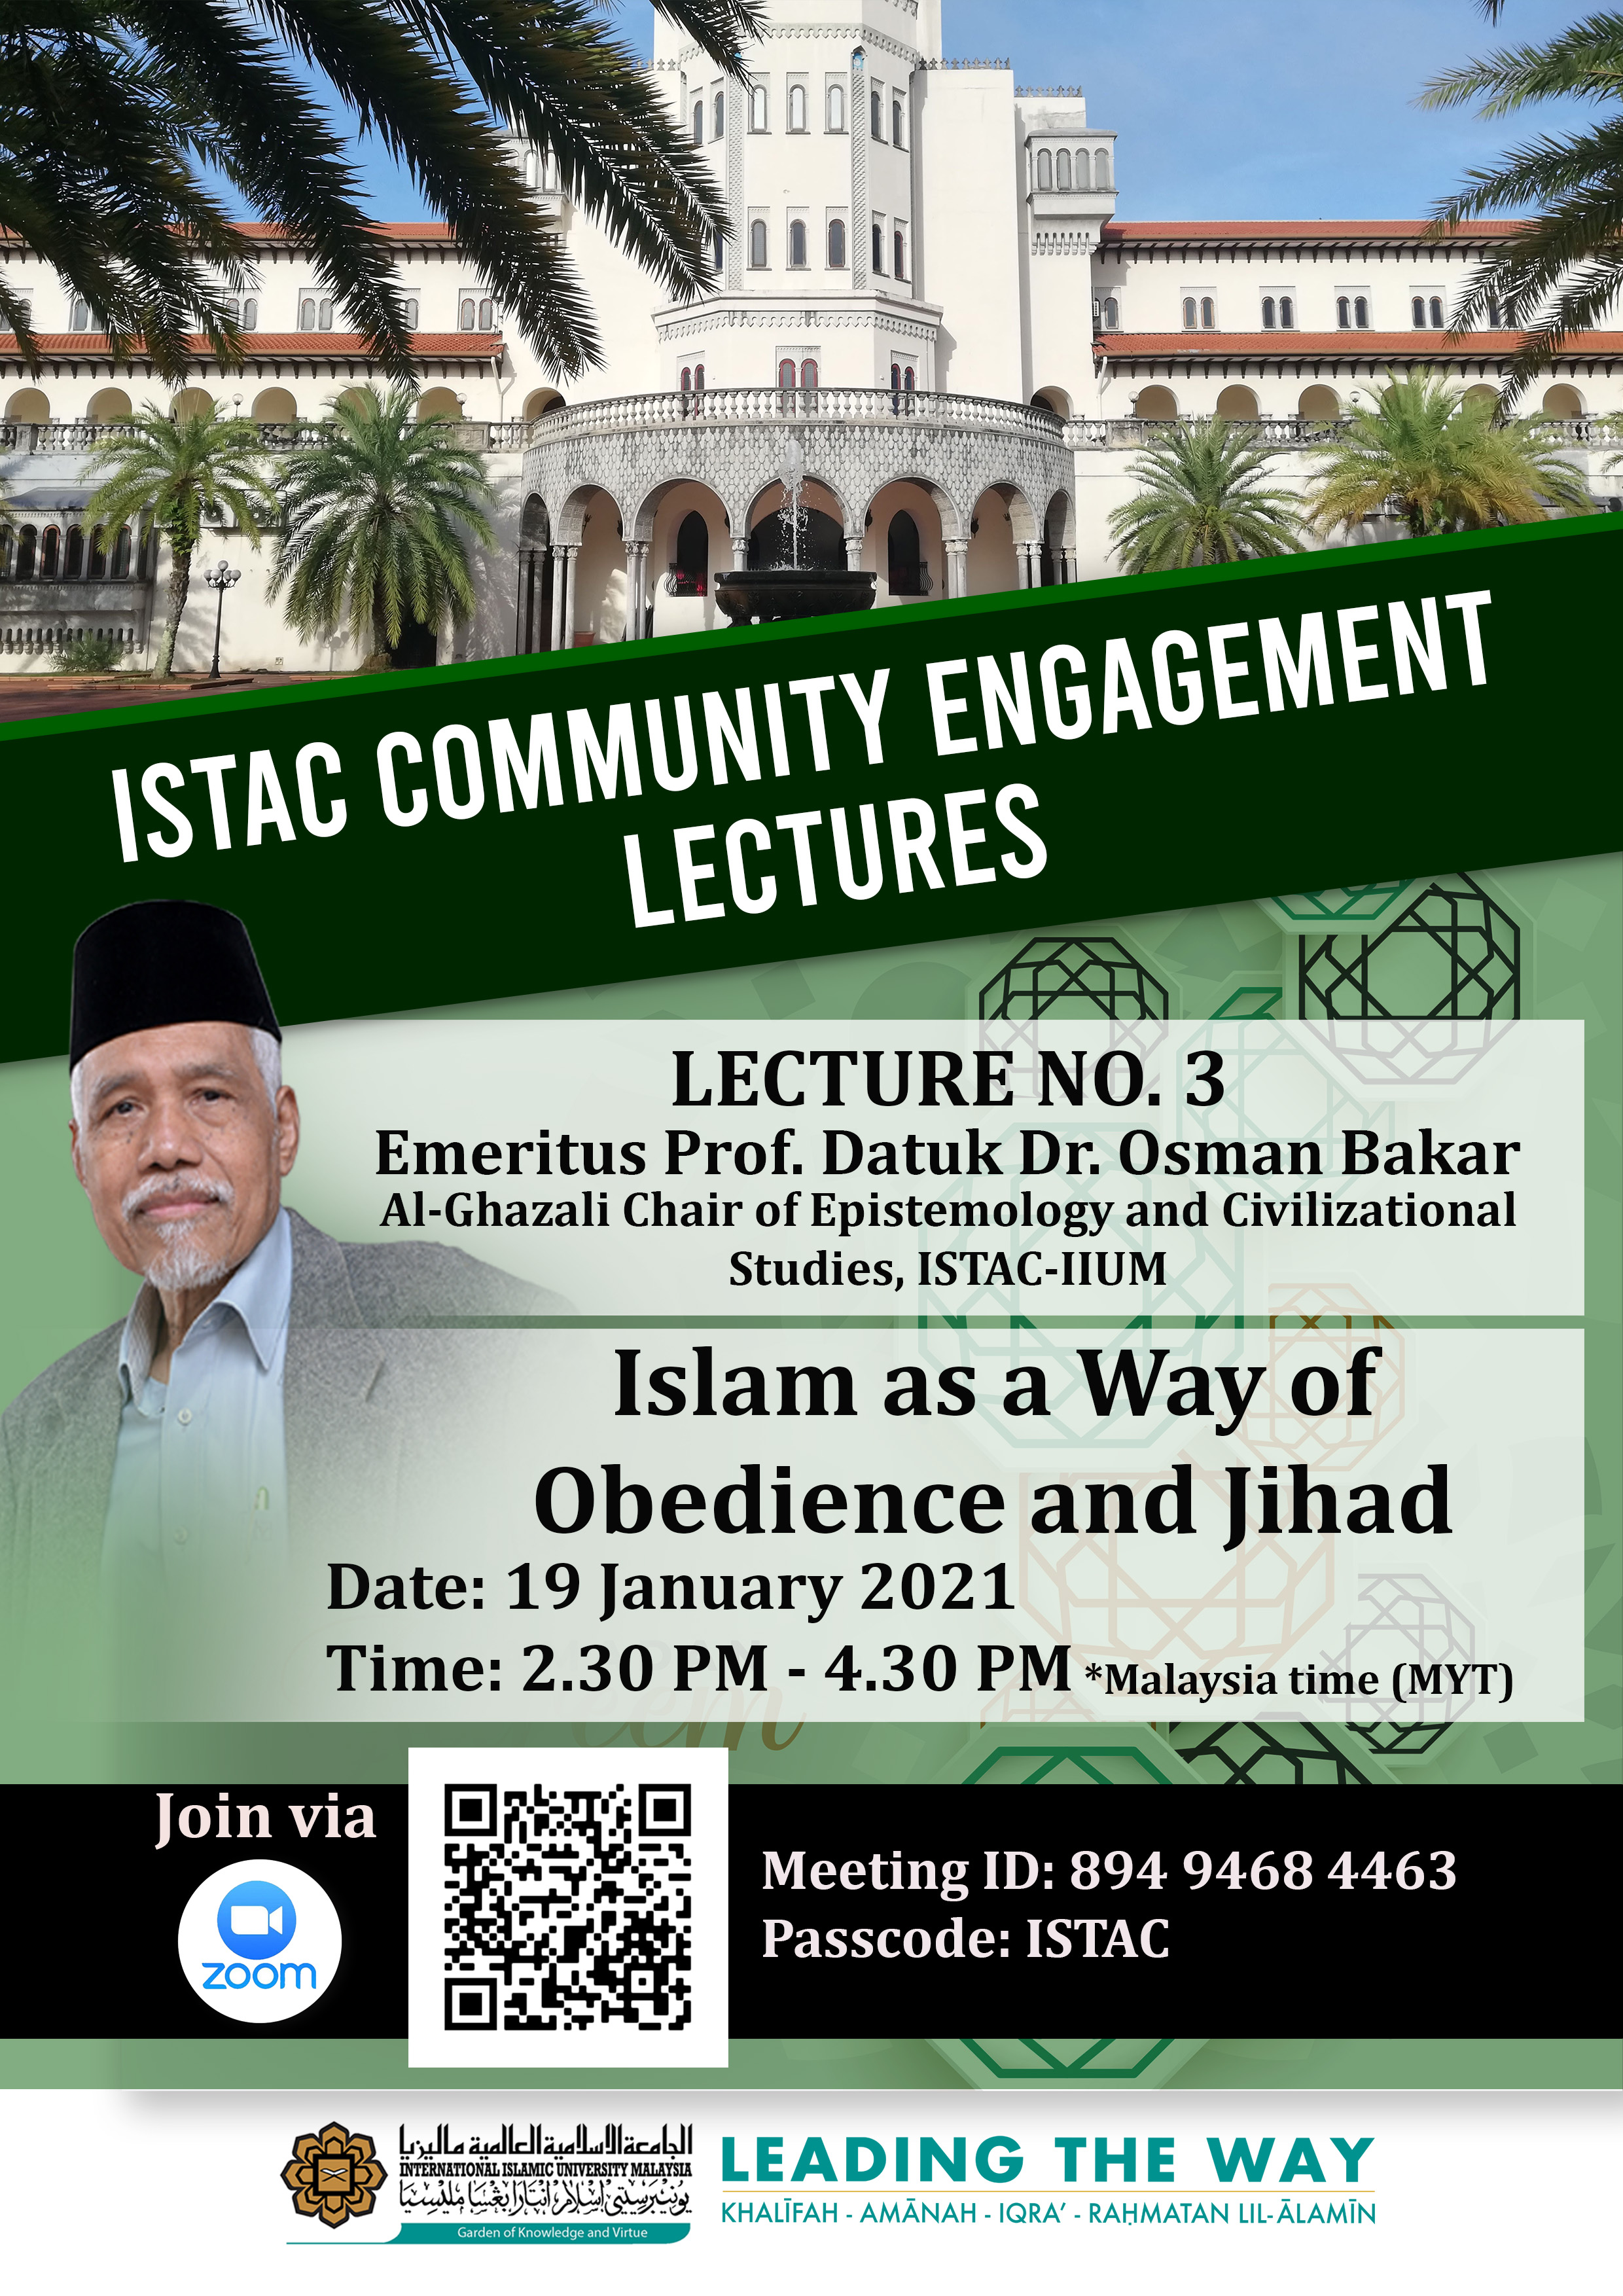 ISTAC COMMUNITY ENGAGEMENT LECTURES - LECTURE NO. 3